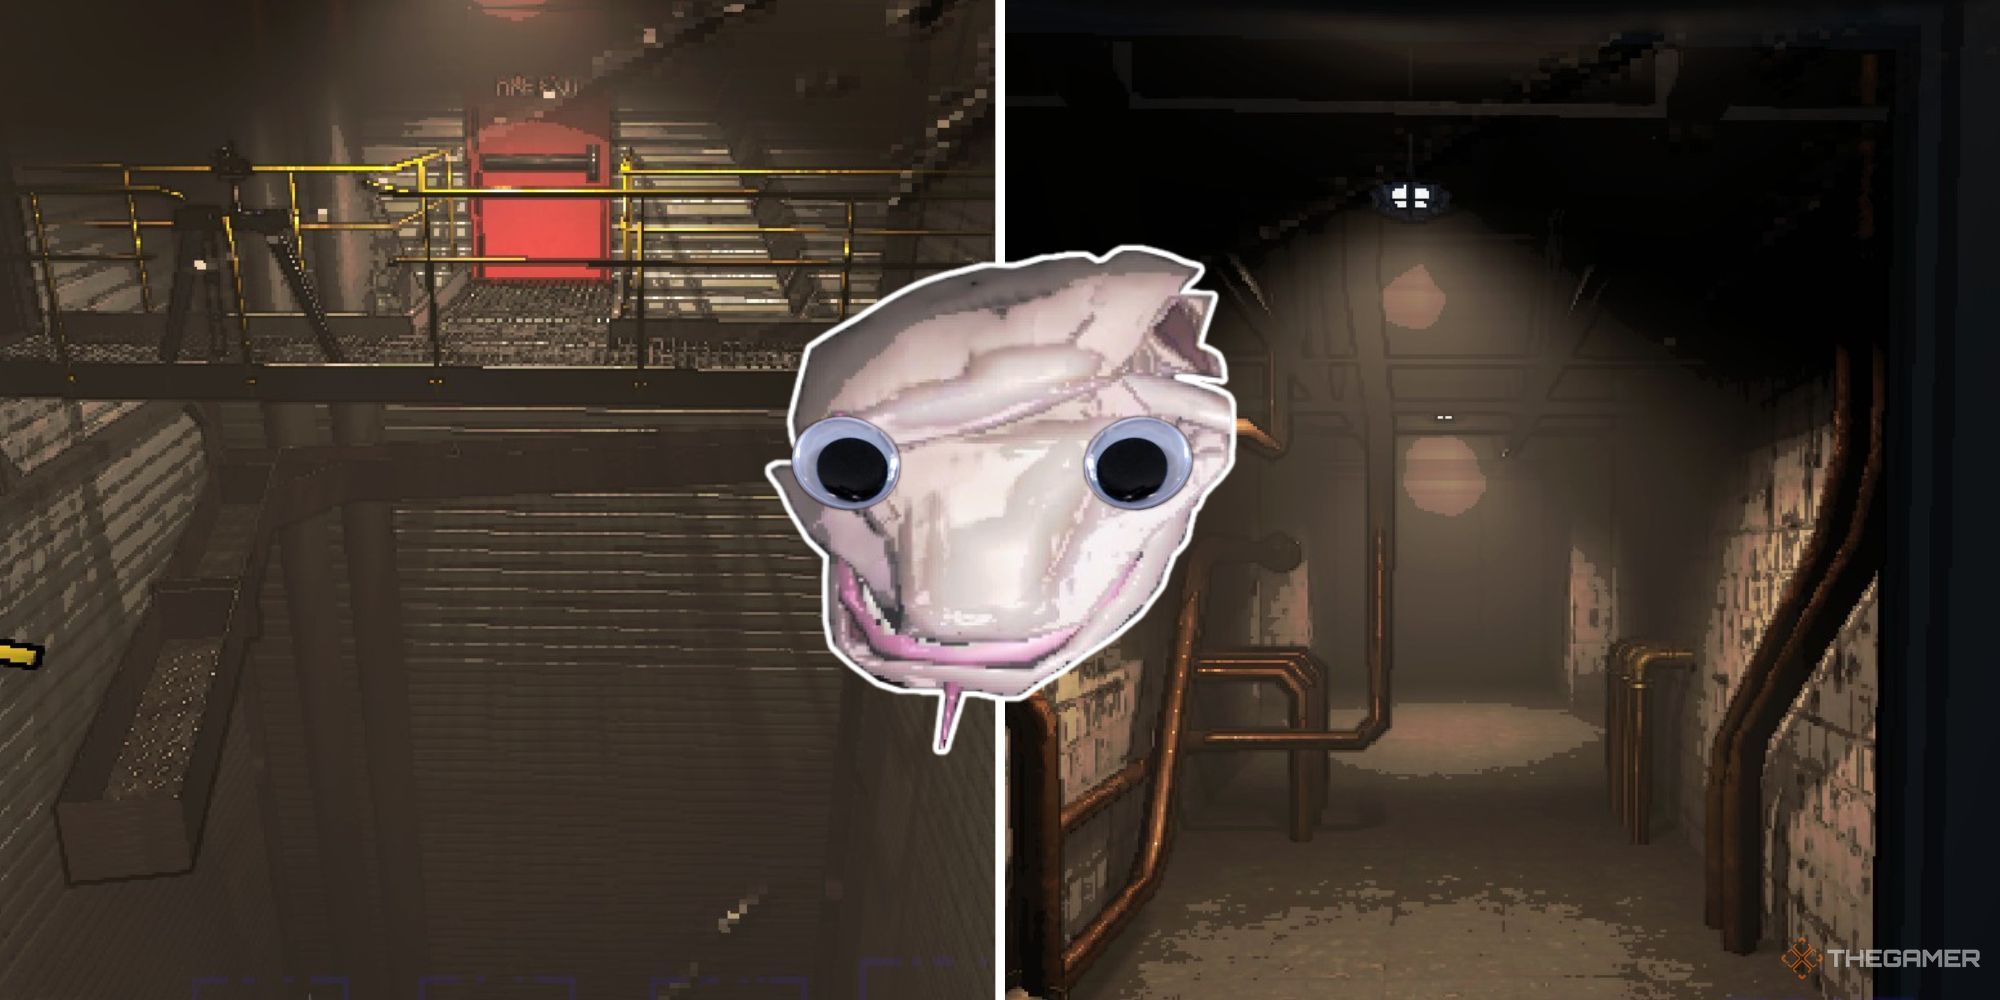 A Thumper head with googly eyes overlayed over a split image of a deadly gap between two railings, and a long, dimly lit corridor.